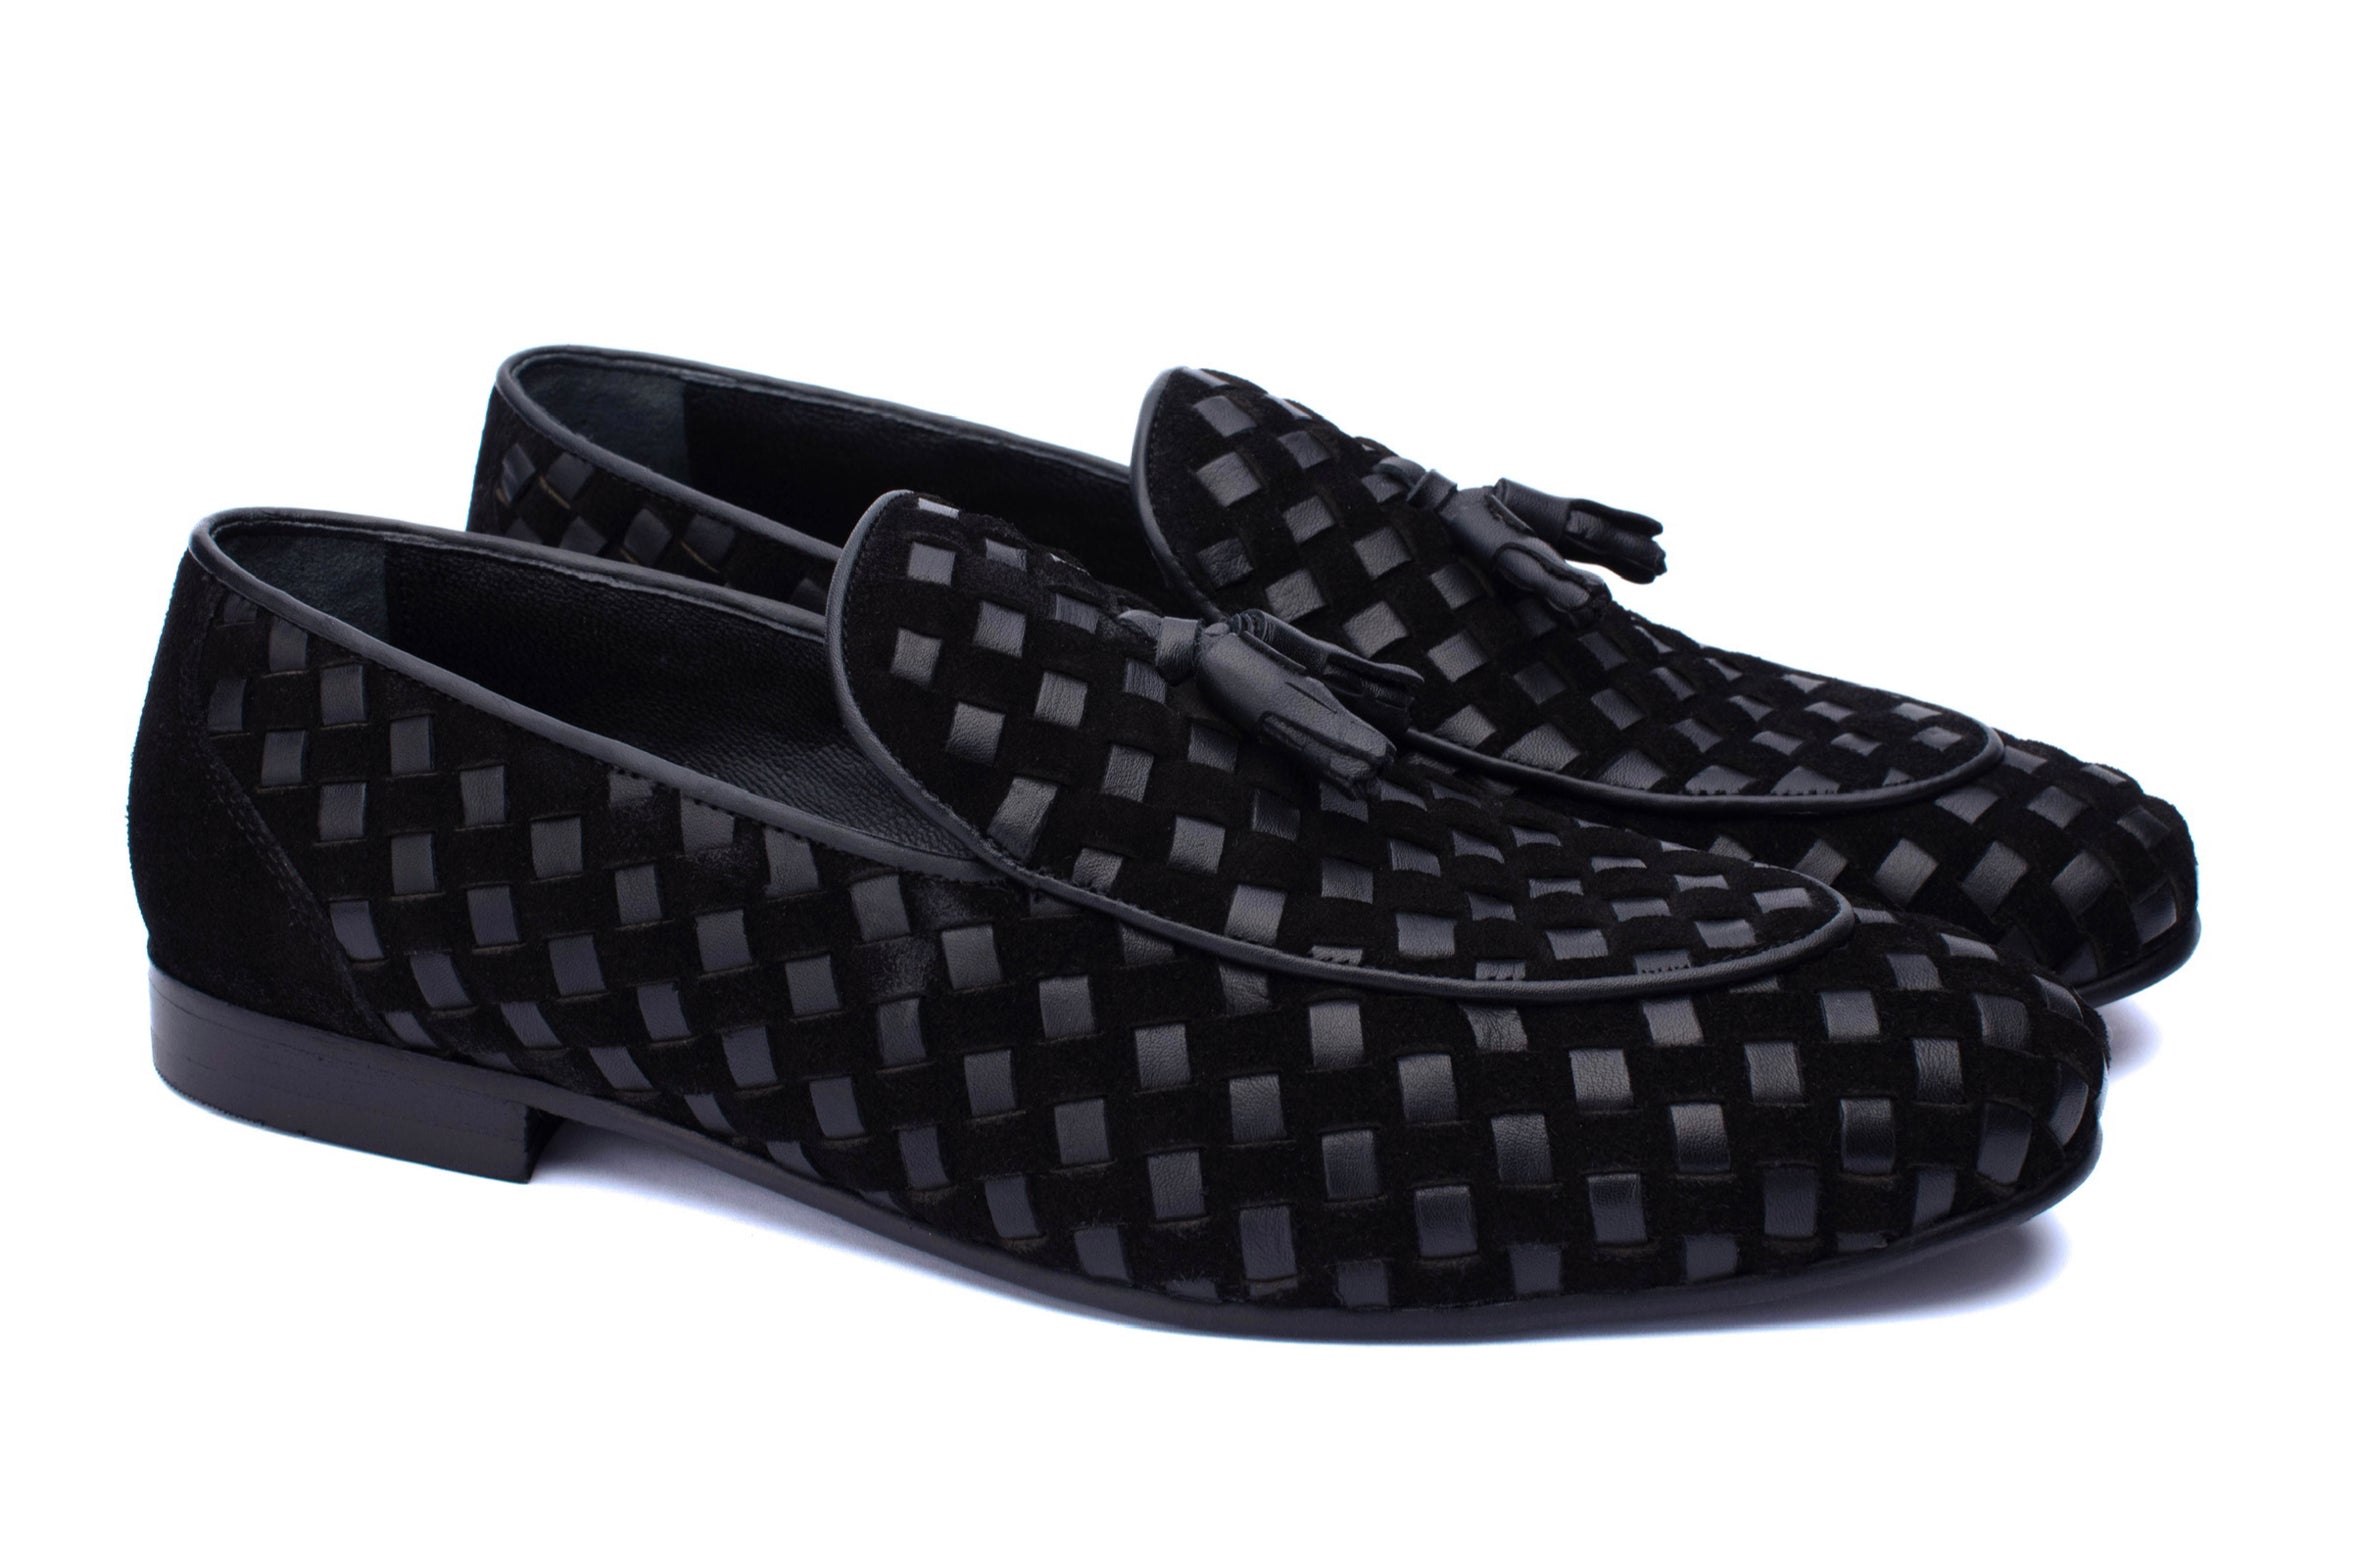 The Braided Loafers - Black - Loafers by Urbbana